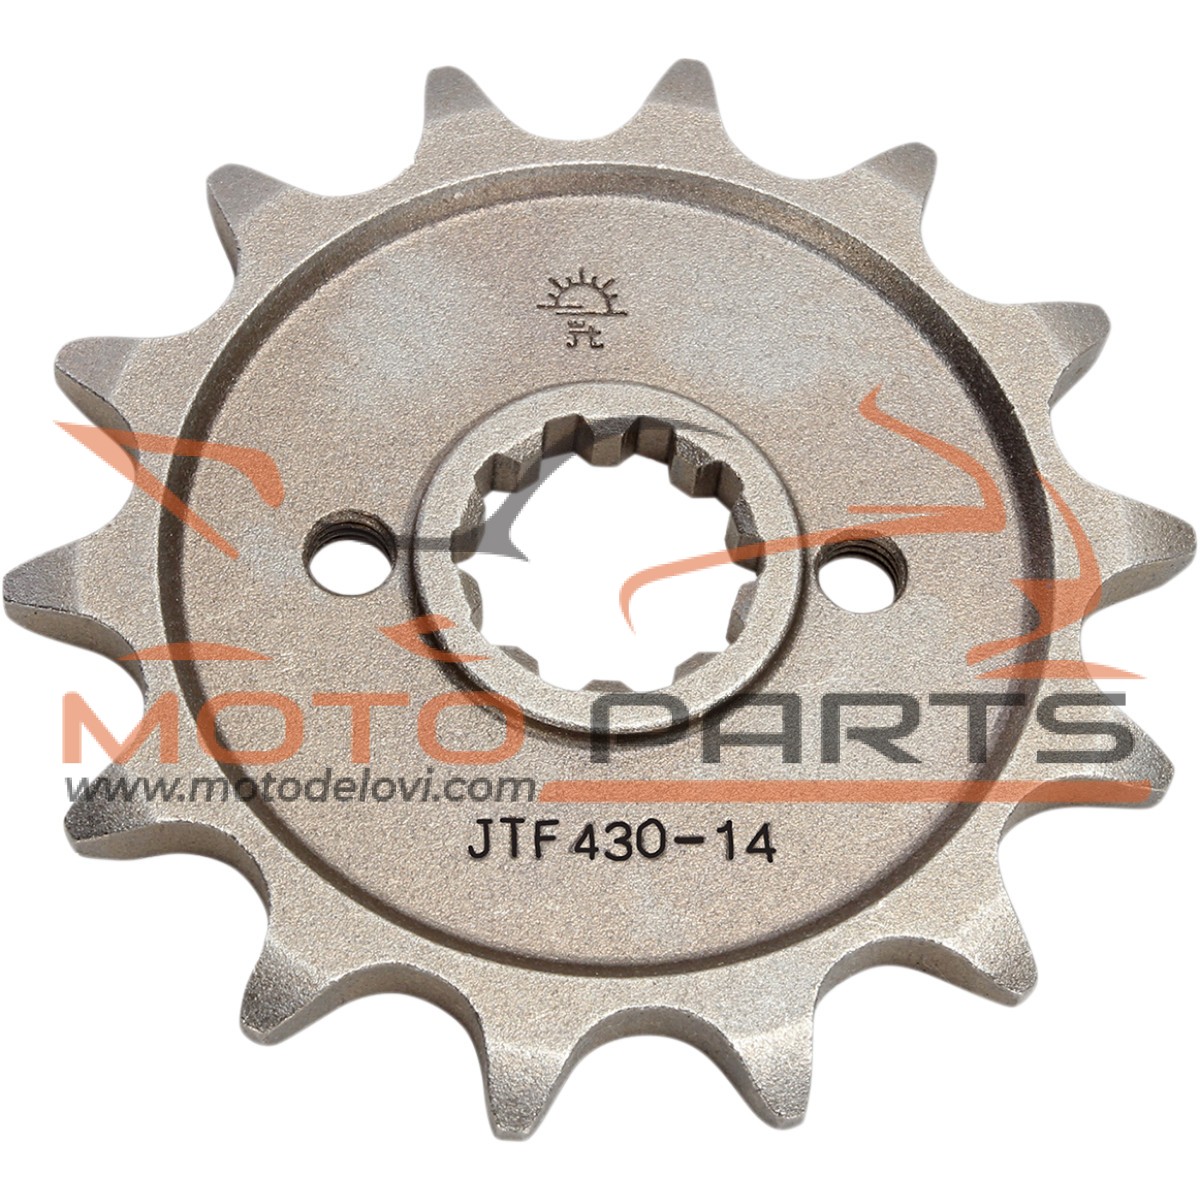 JTF430.14 FRONT REPLACEMENT SPROCKET 14 TEETH 520 PITCH NATURAL STEEL